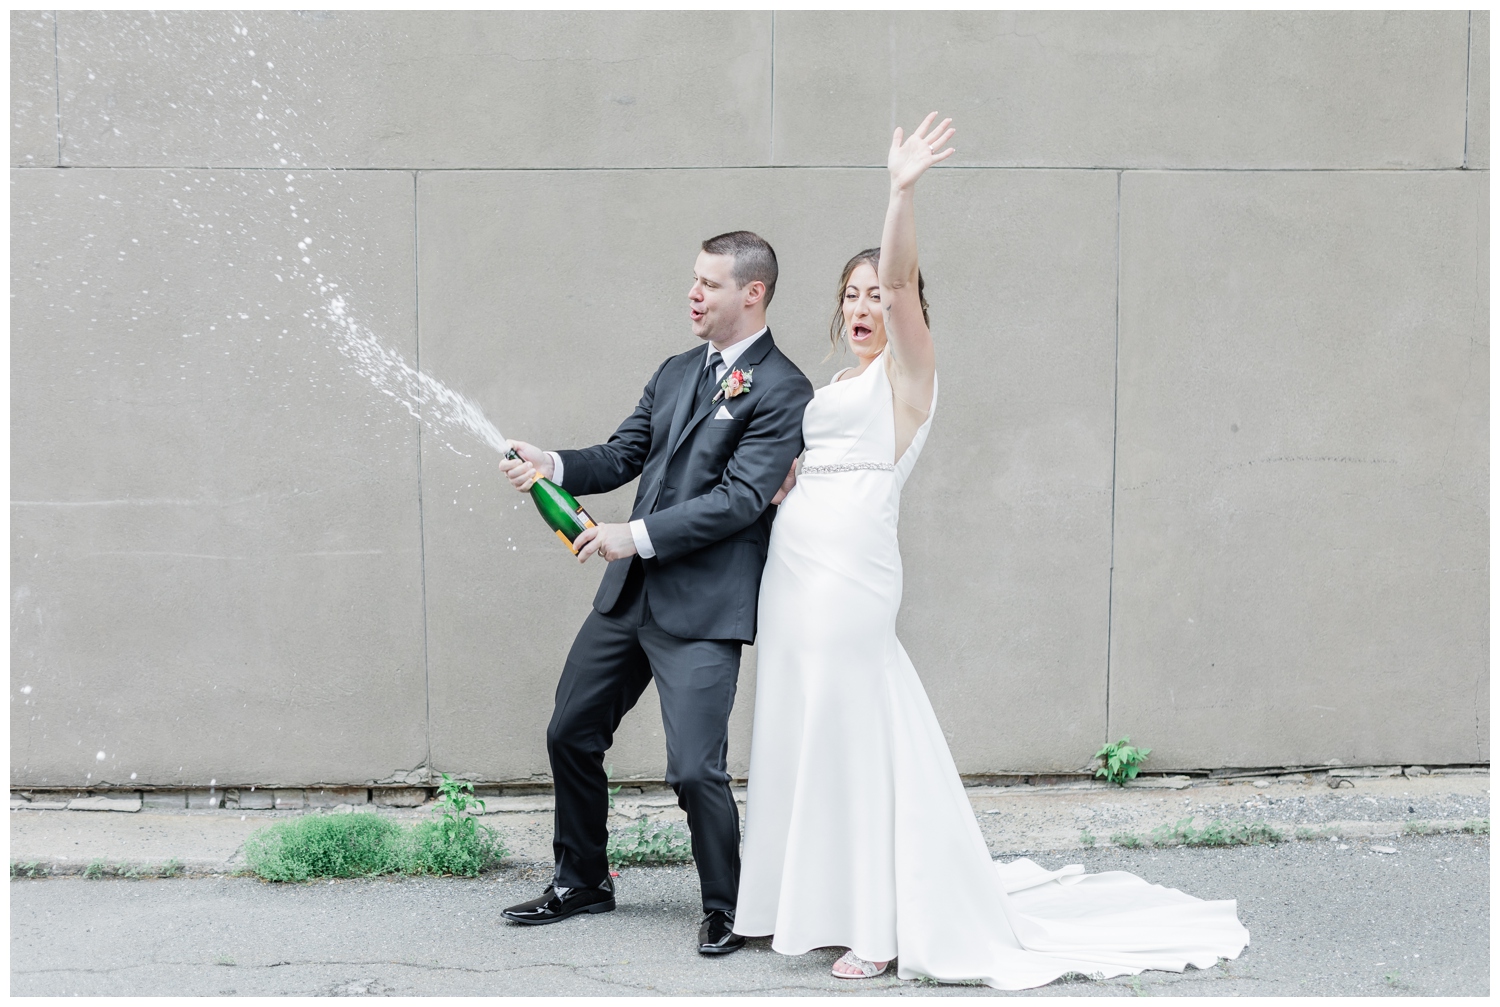 Just married couple popping champagne in downtown Troy, NY in celebration of their wedding.